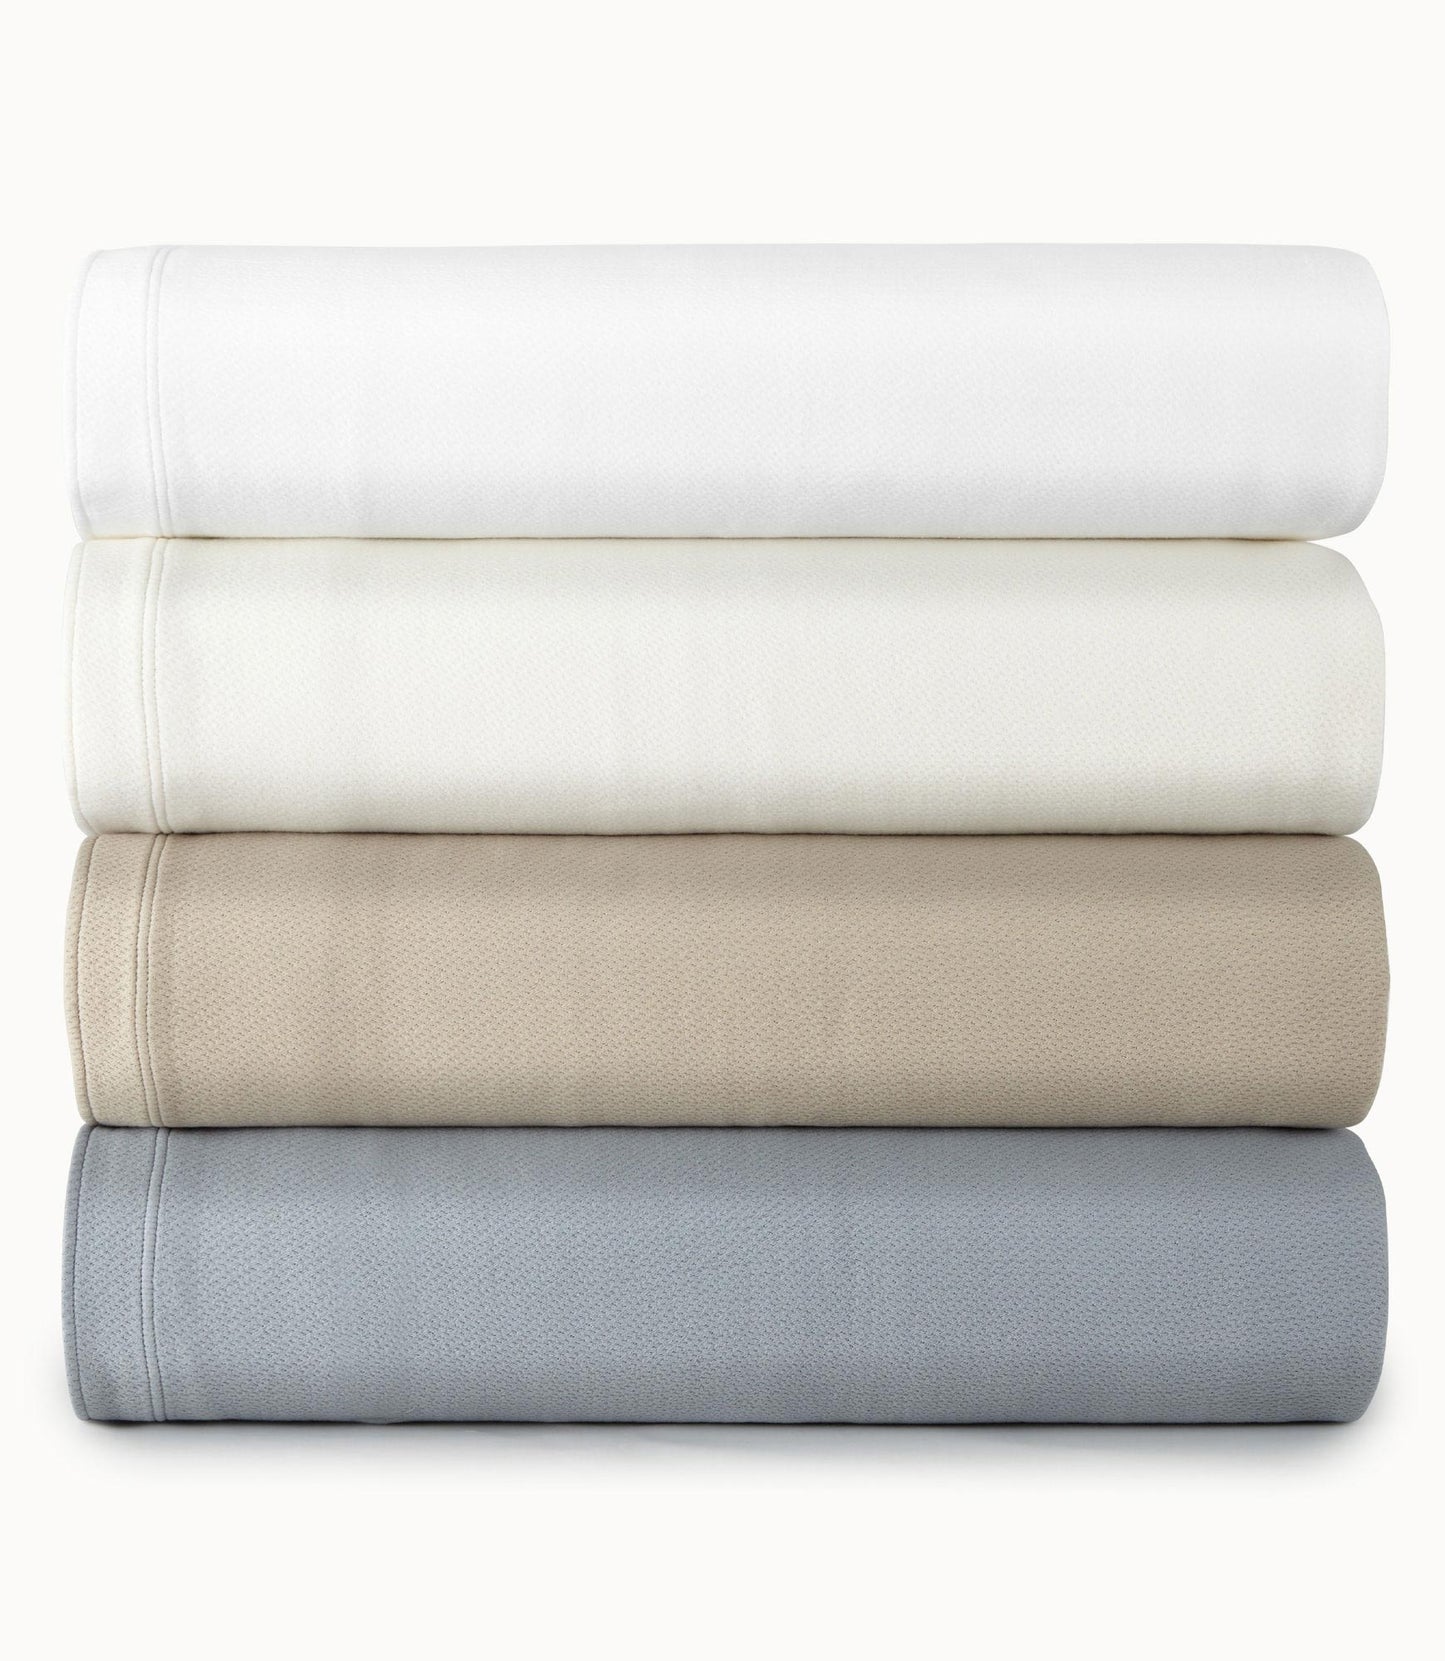 Angie Matelasse Coverlet folded stack in various colors White Pearl Dune Smokey Blue